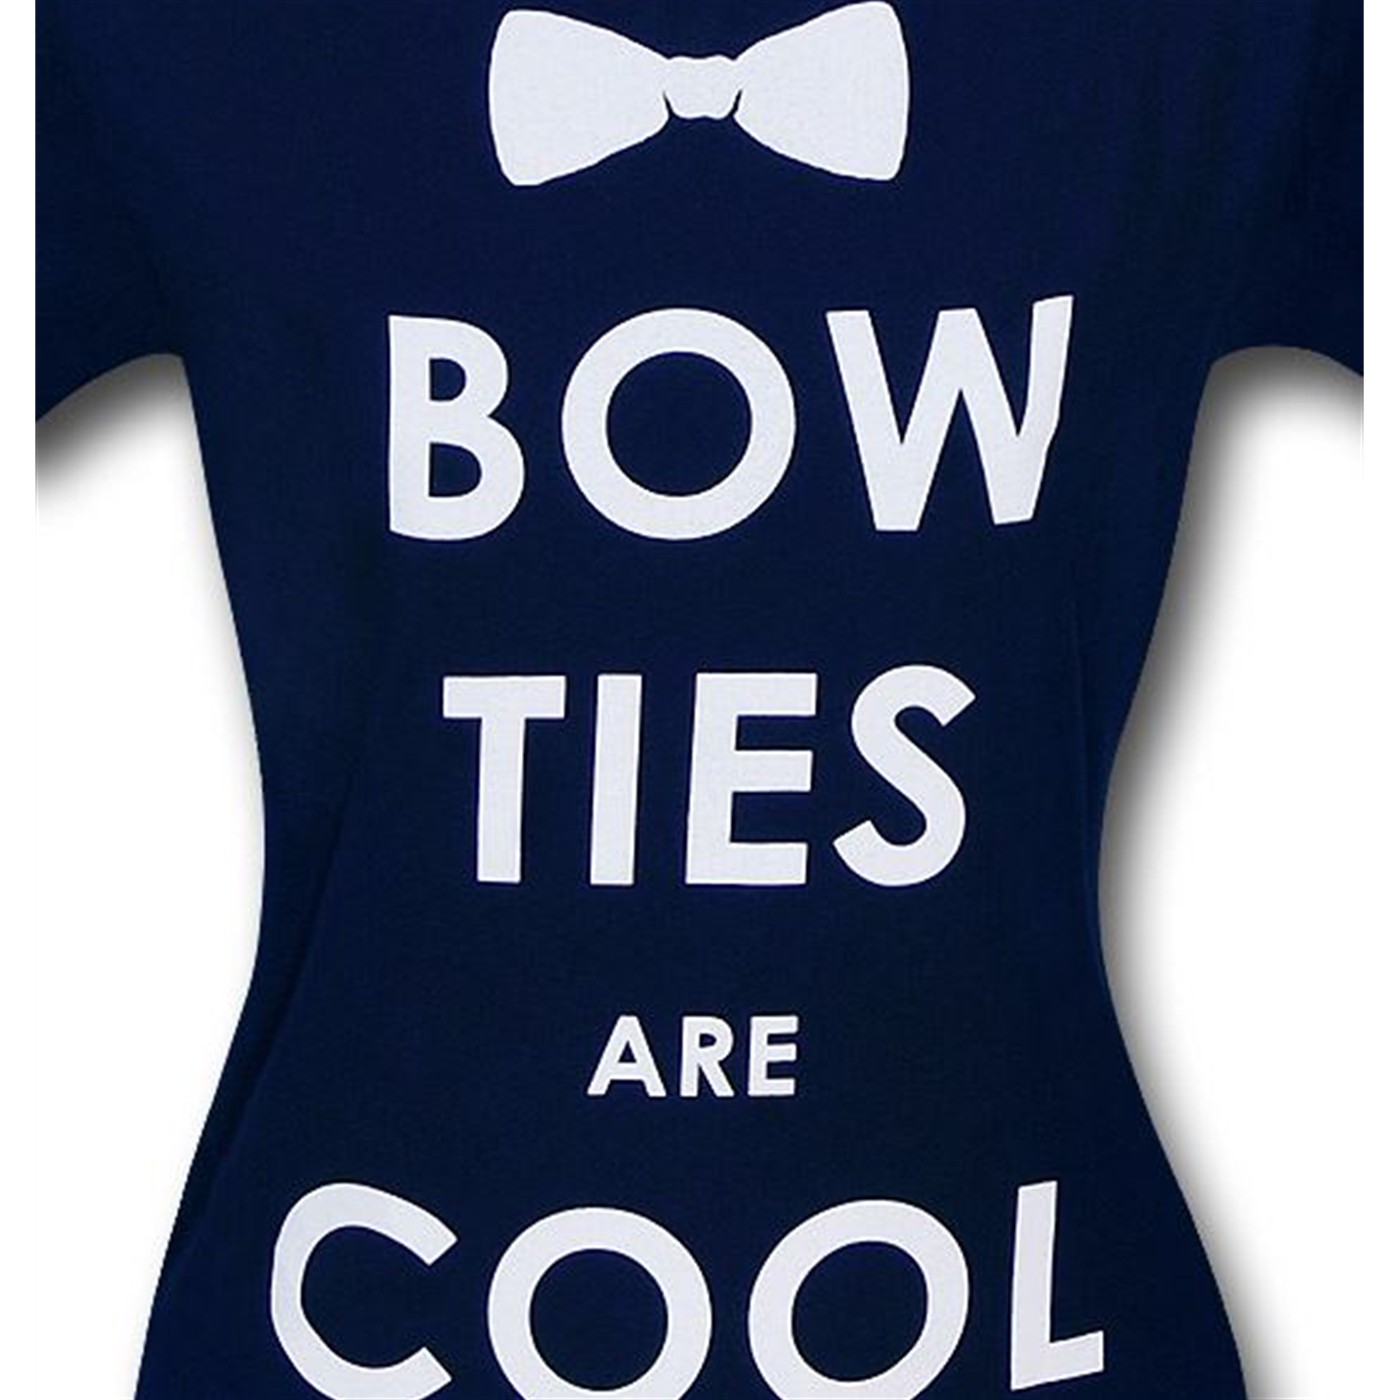 Doctor Who Bow Ties Are Cool Women's T-Shirt